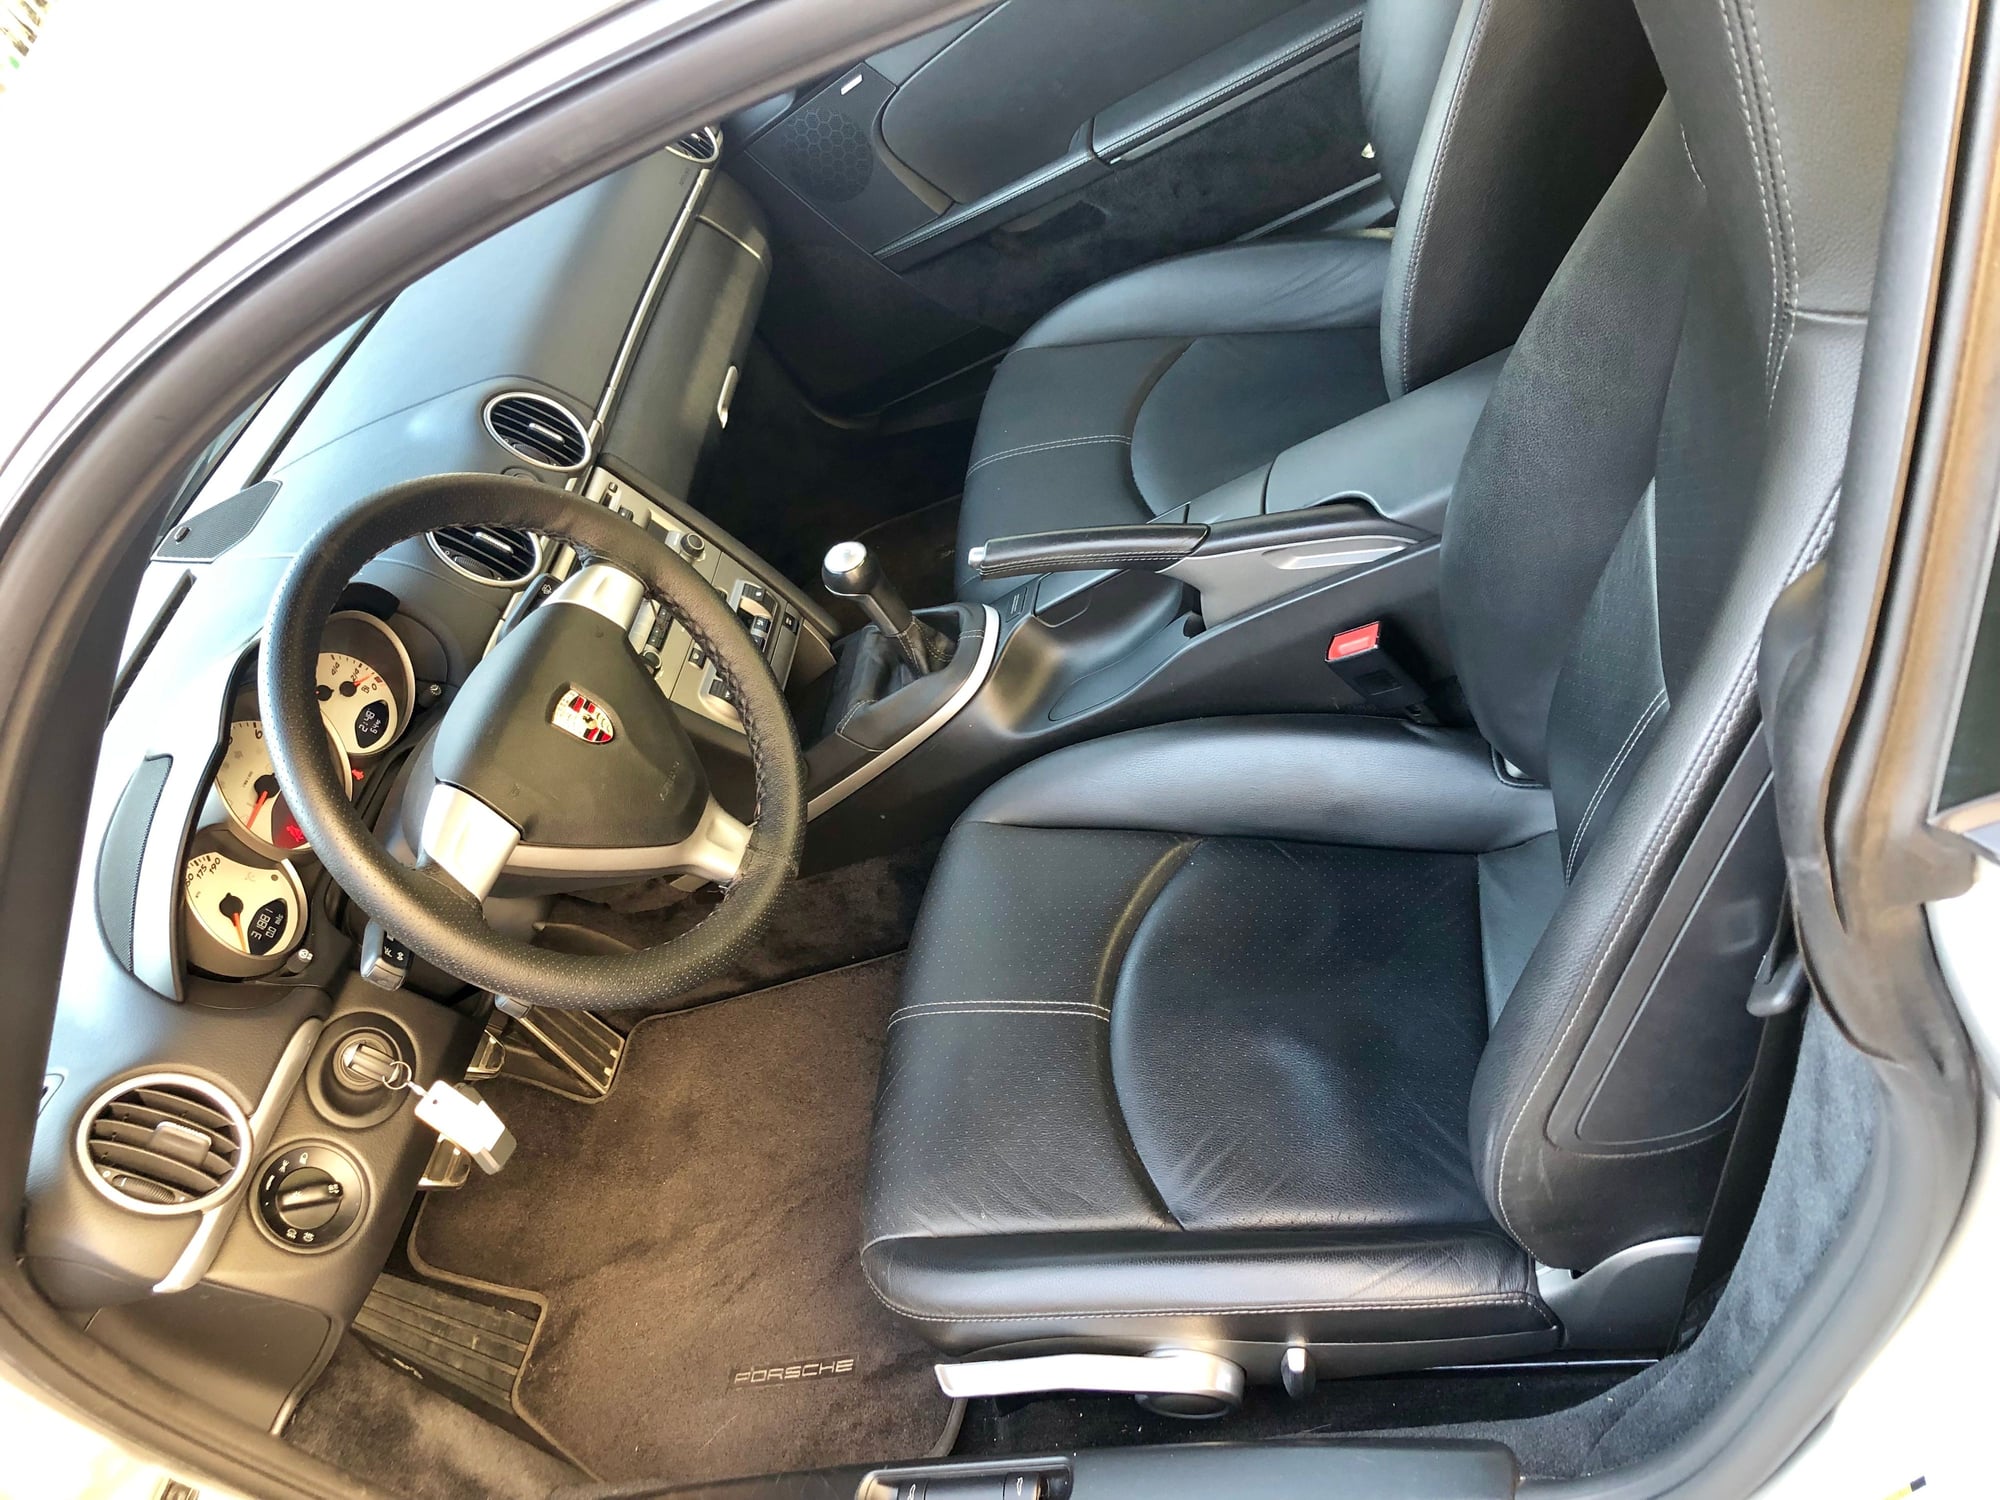 2006 Porsche Cayman - 2006 Porsche Cayman S - 32k miles.  $25,250 sale pending (first $26k takes it) - Used - VIN WP0AB29846U785983 - 32,500 Miles - 6 cyl - 2WD - Manual - Coupe - Silver - Dallas, TX 75204, United States